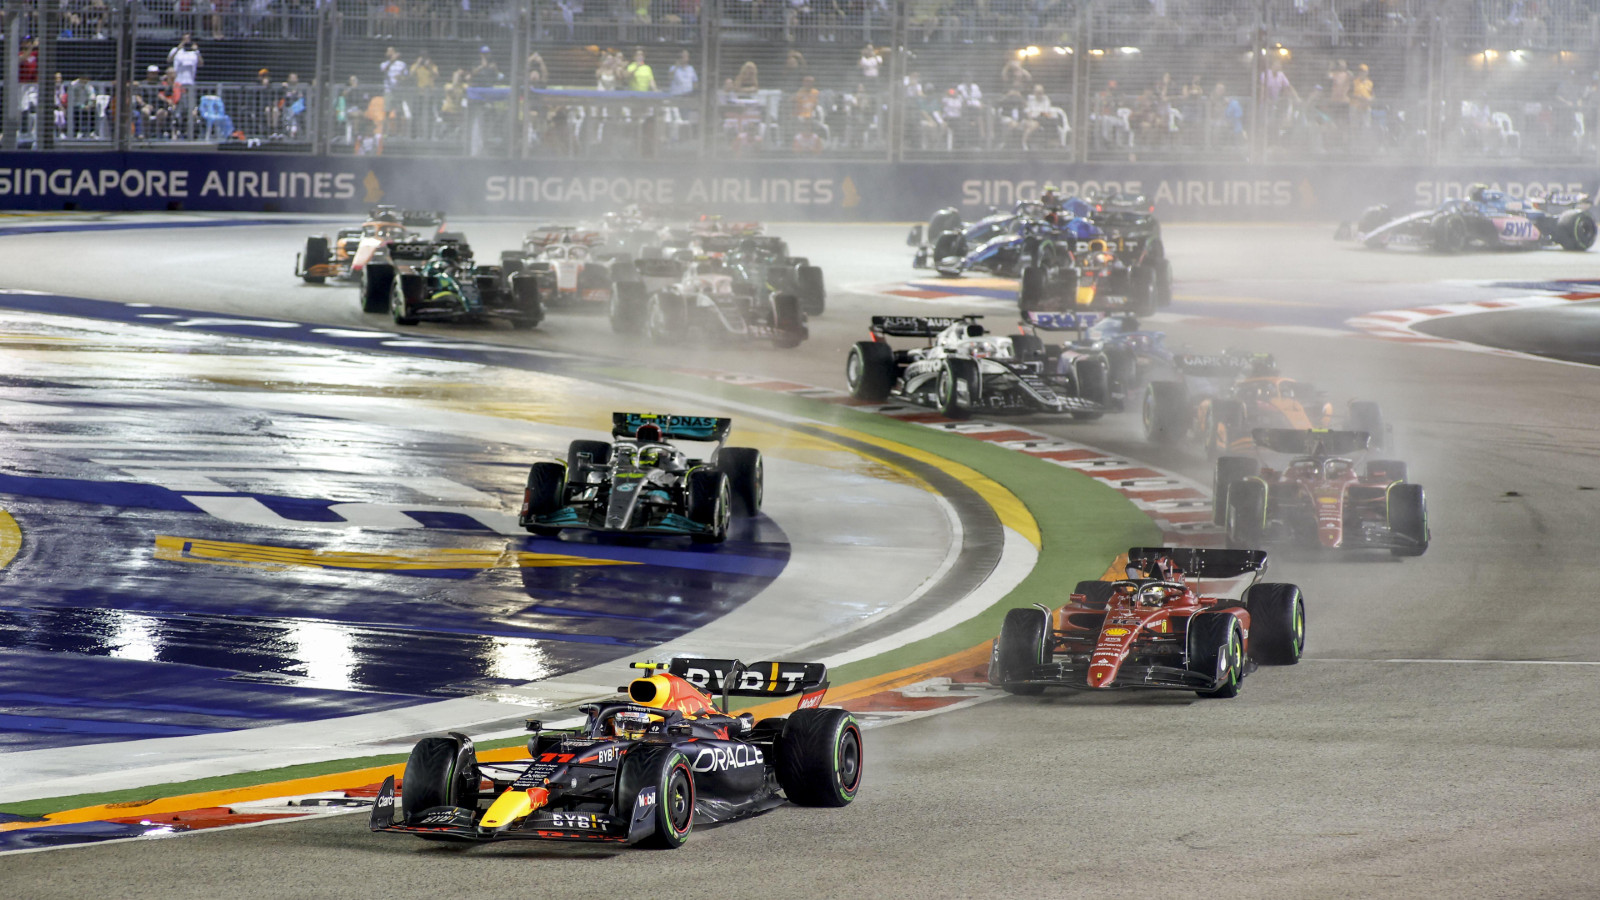 Red Bull's Sergio Perez leads the pack at the Singapore Grand Prix. Marina Bay, October 2022. Budget cap